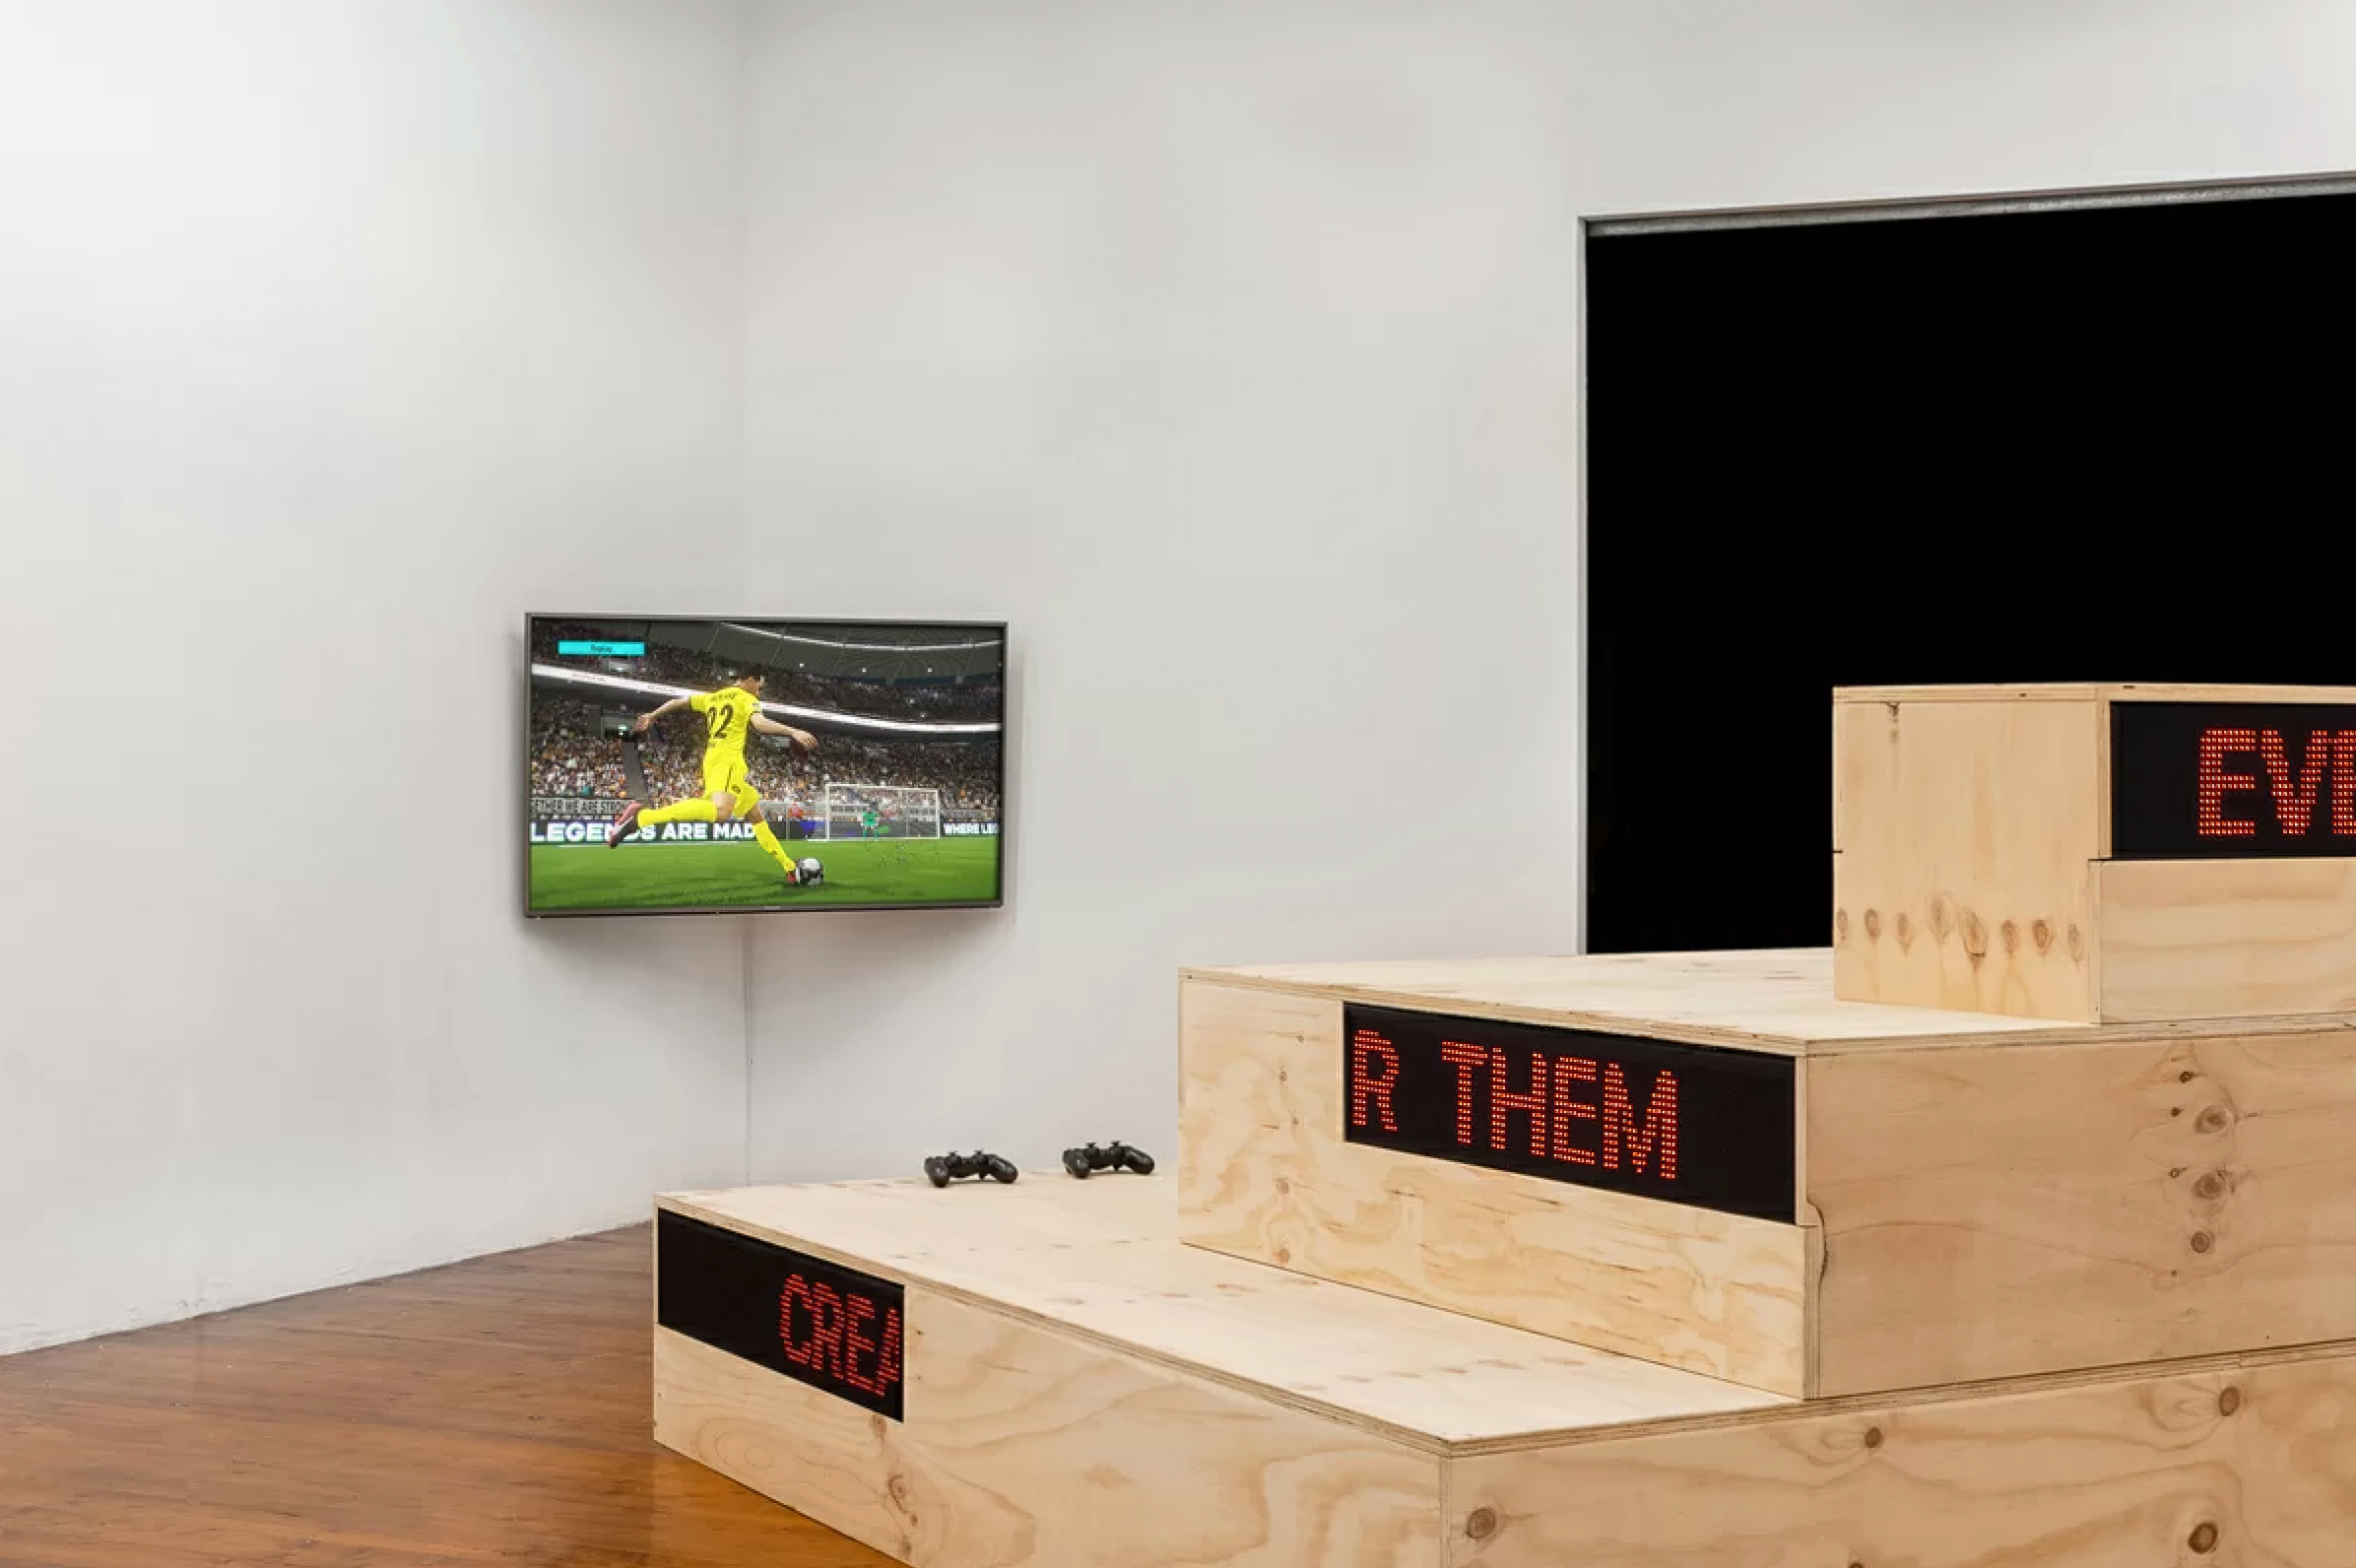  The Cool Couple,  Emozioni Mondiali , interactive installation, monitor, joypads, acrylic paintings, wood, LED, 2018-ongoing, Italy, installation view Mambo, Bologna 